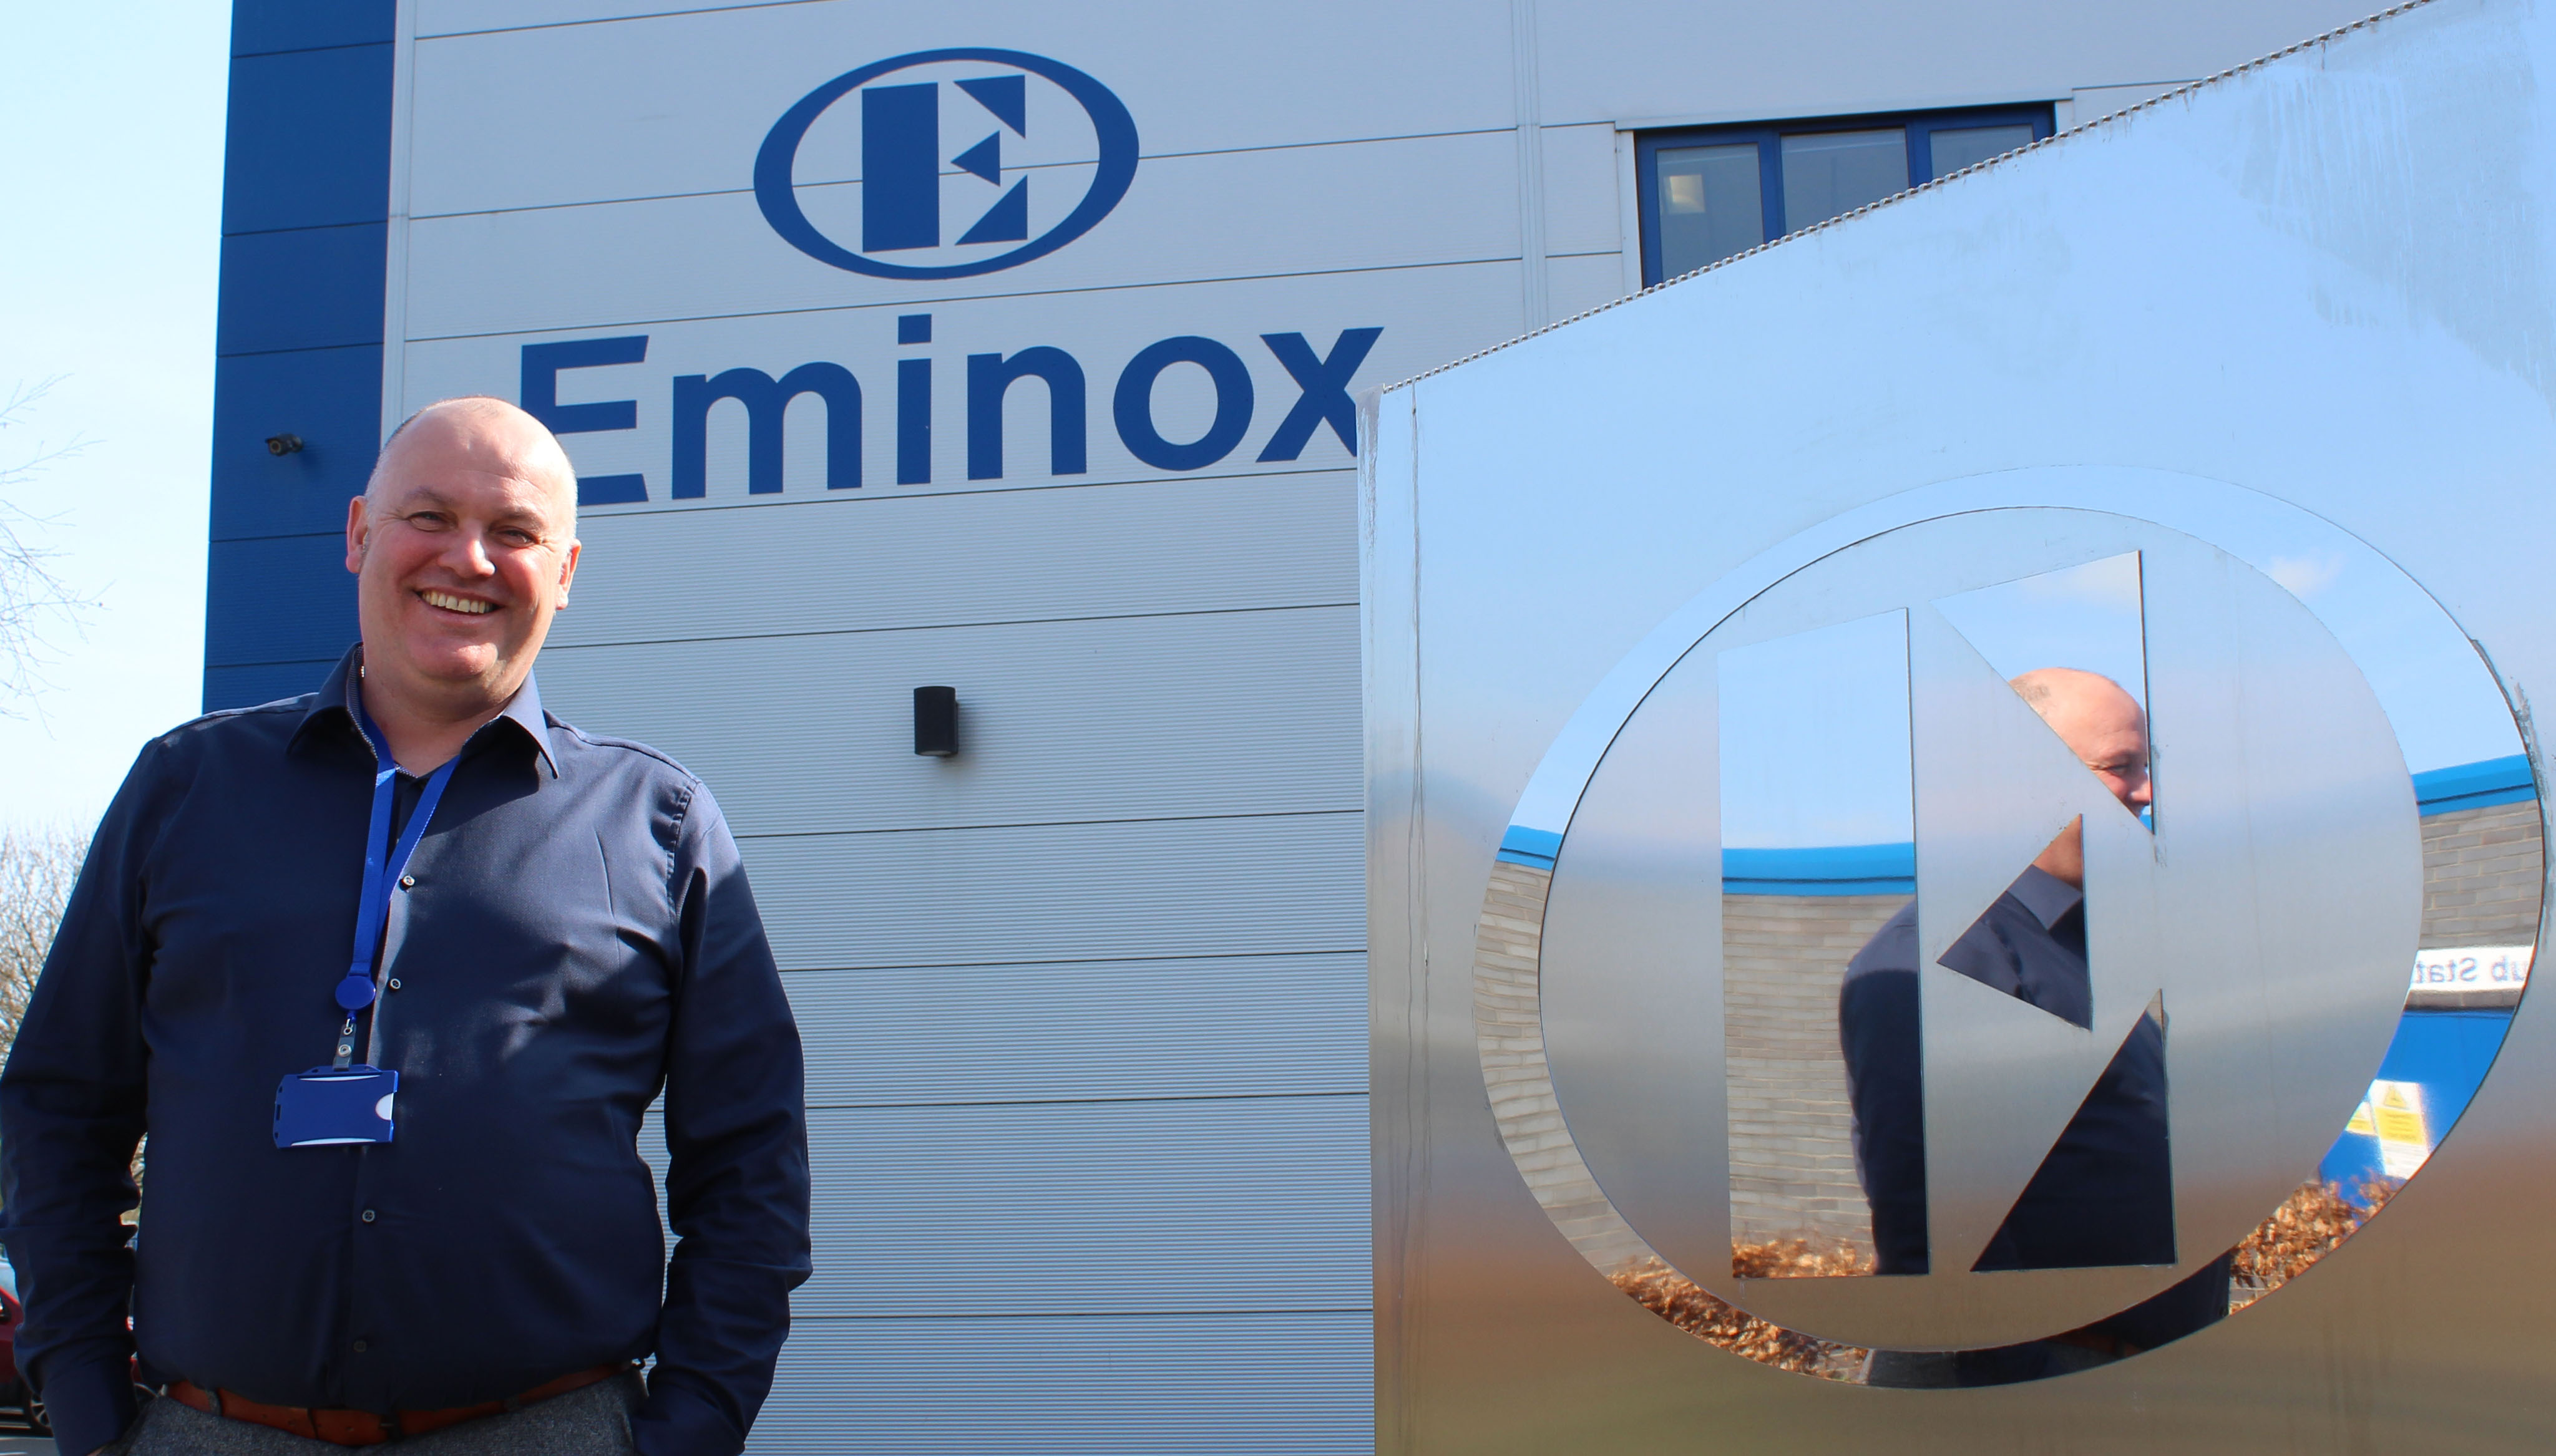 Martin Edwards, Operations Director for Eminox